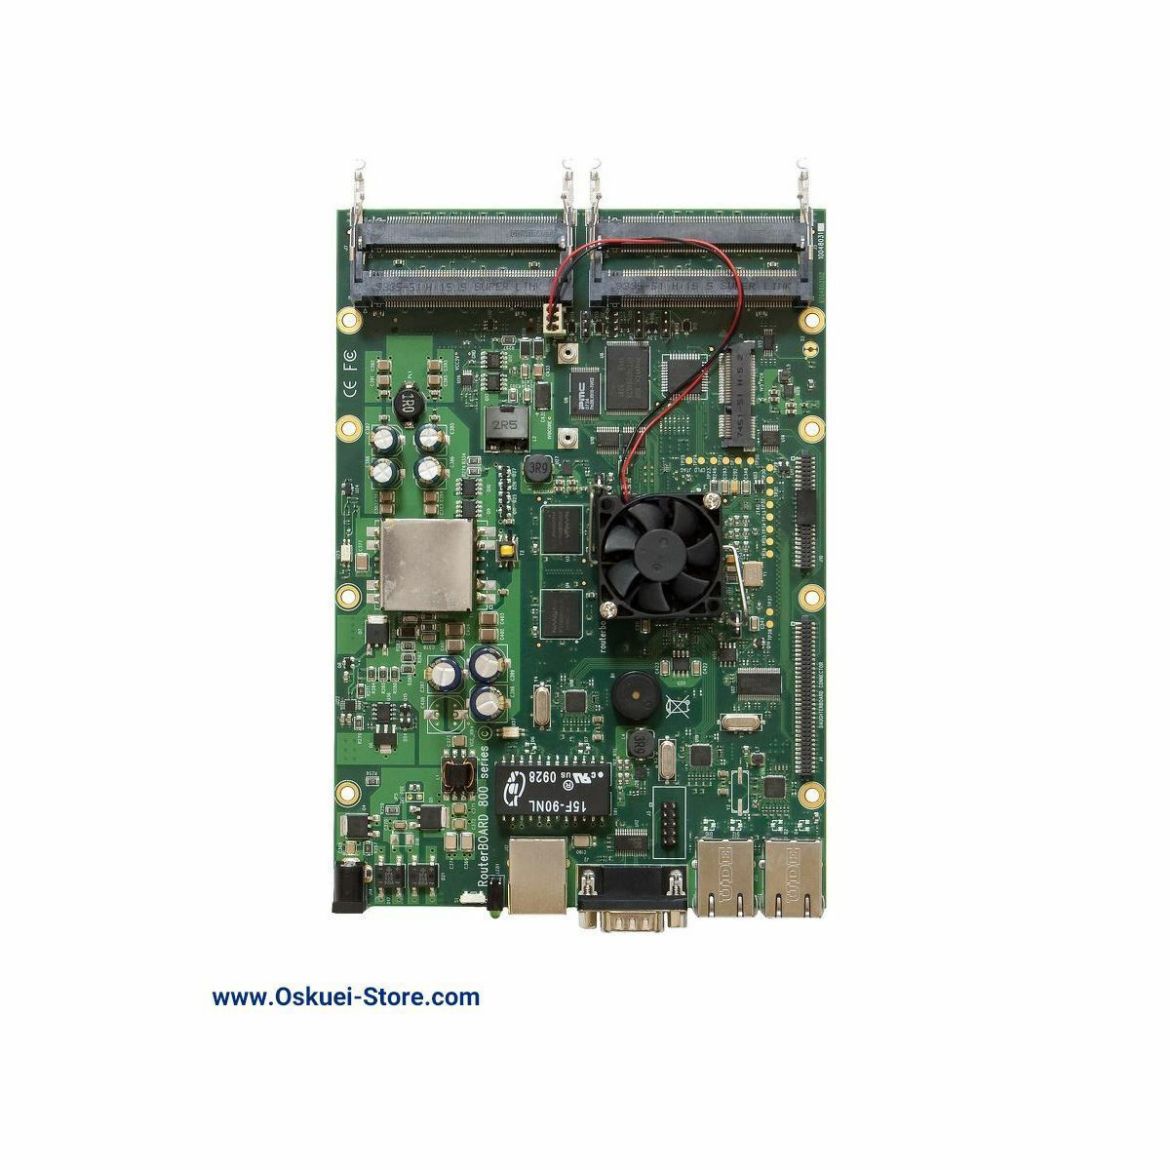 MikroTik RB800 Router Board Front